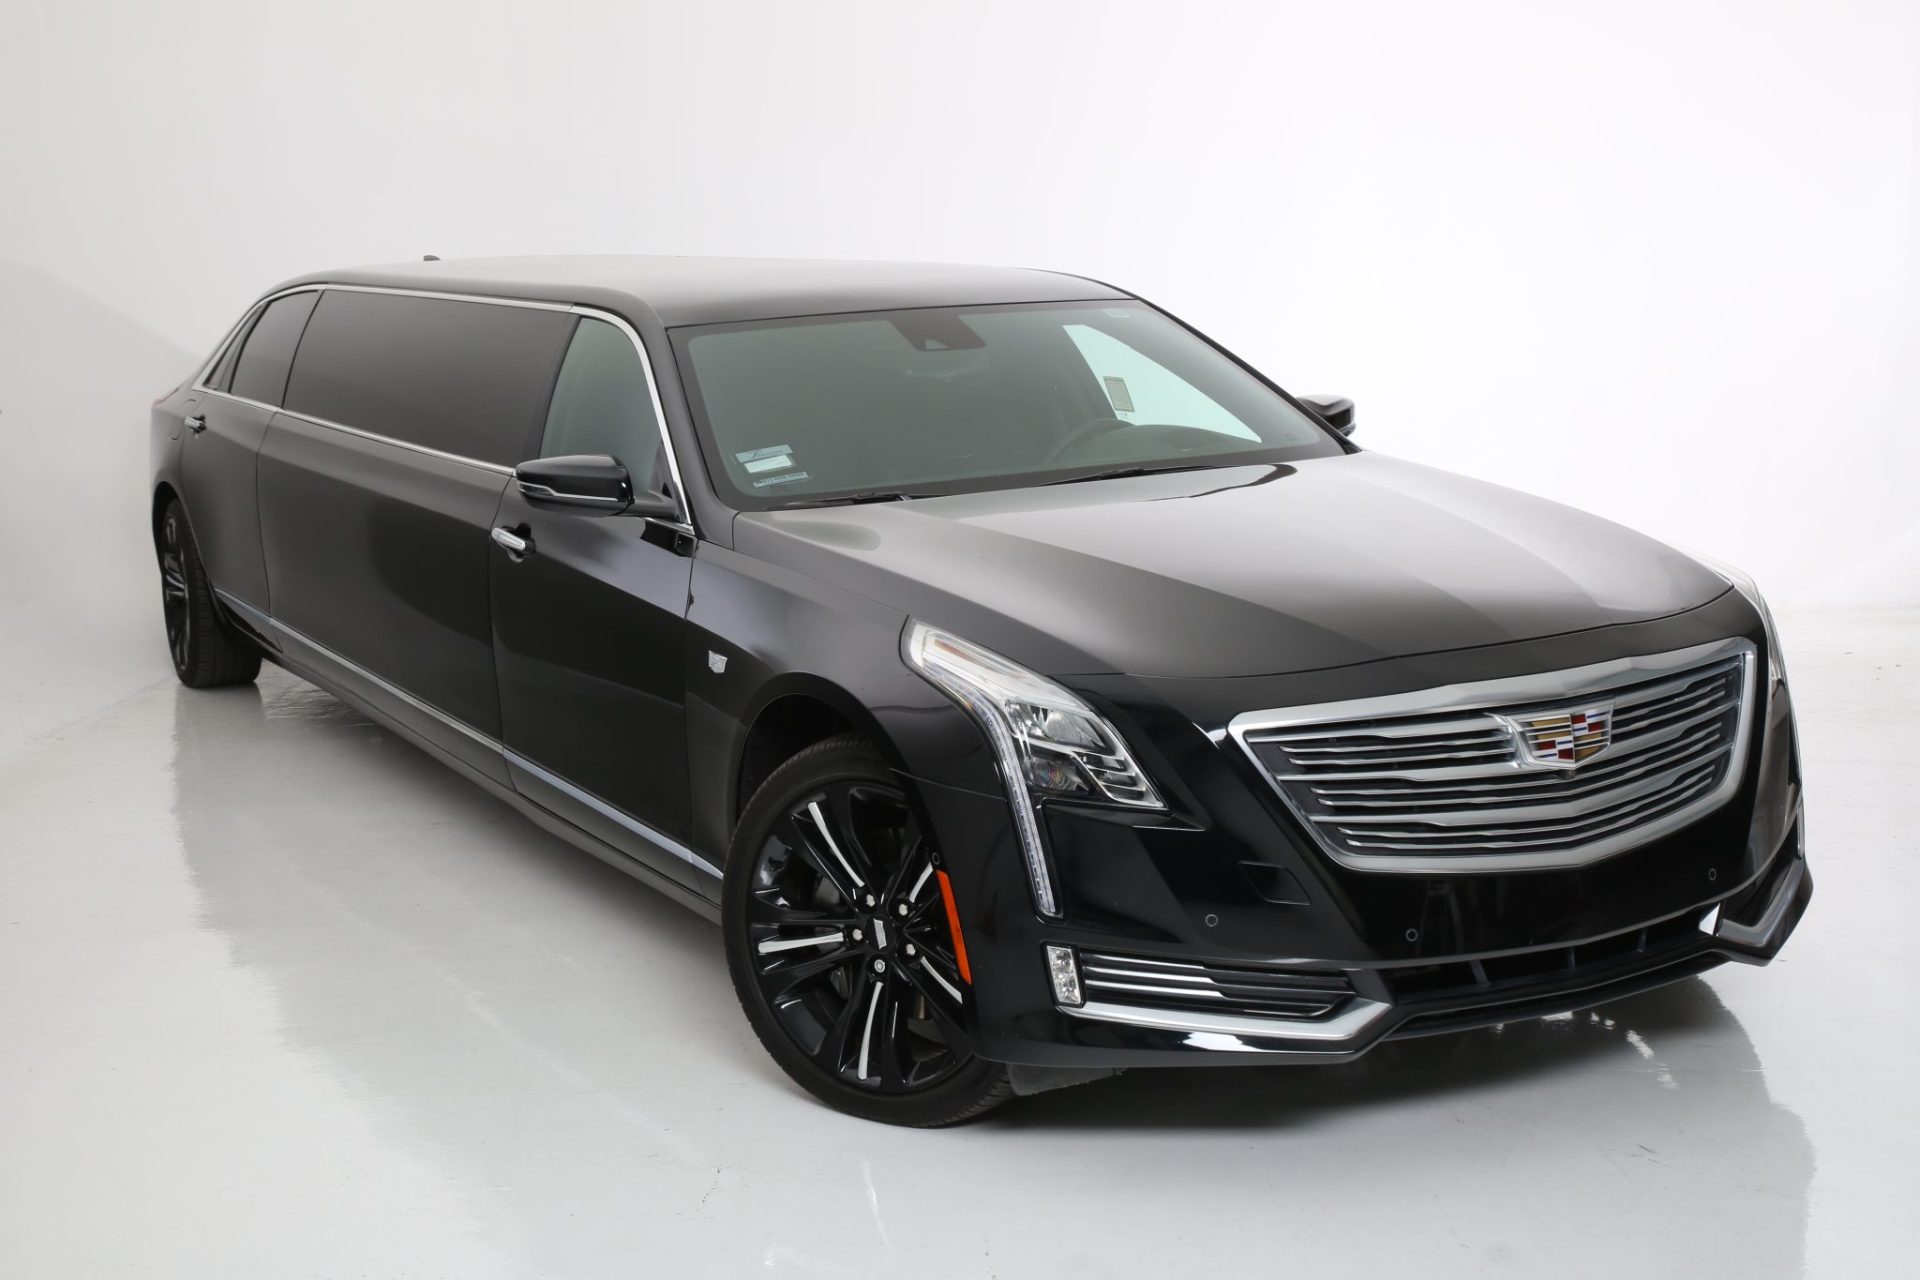 Cadillac CT6-V Stretched Limousine - Exterior Photo #4